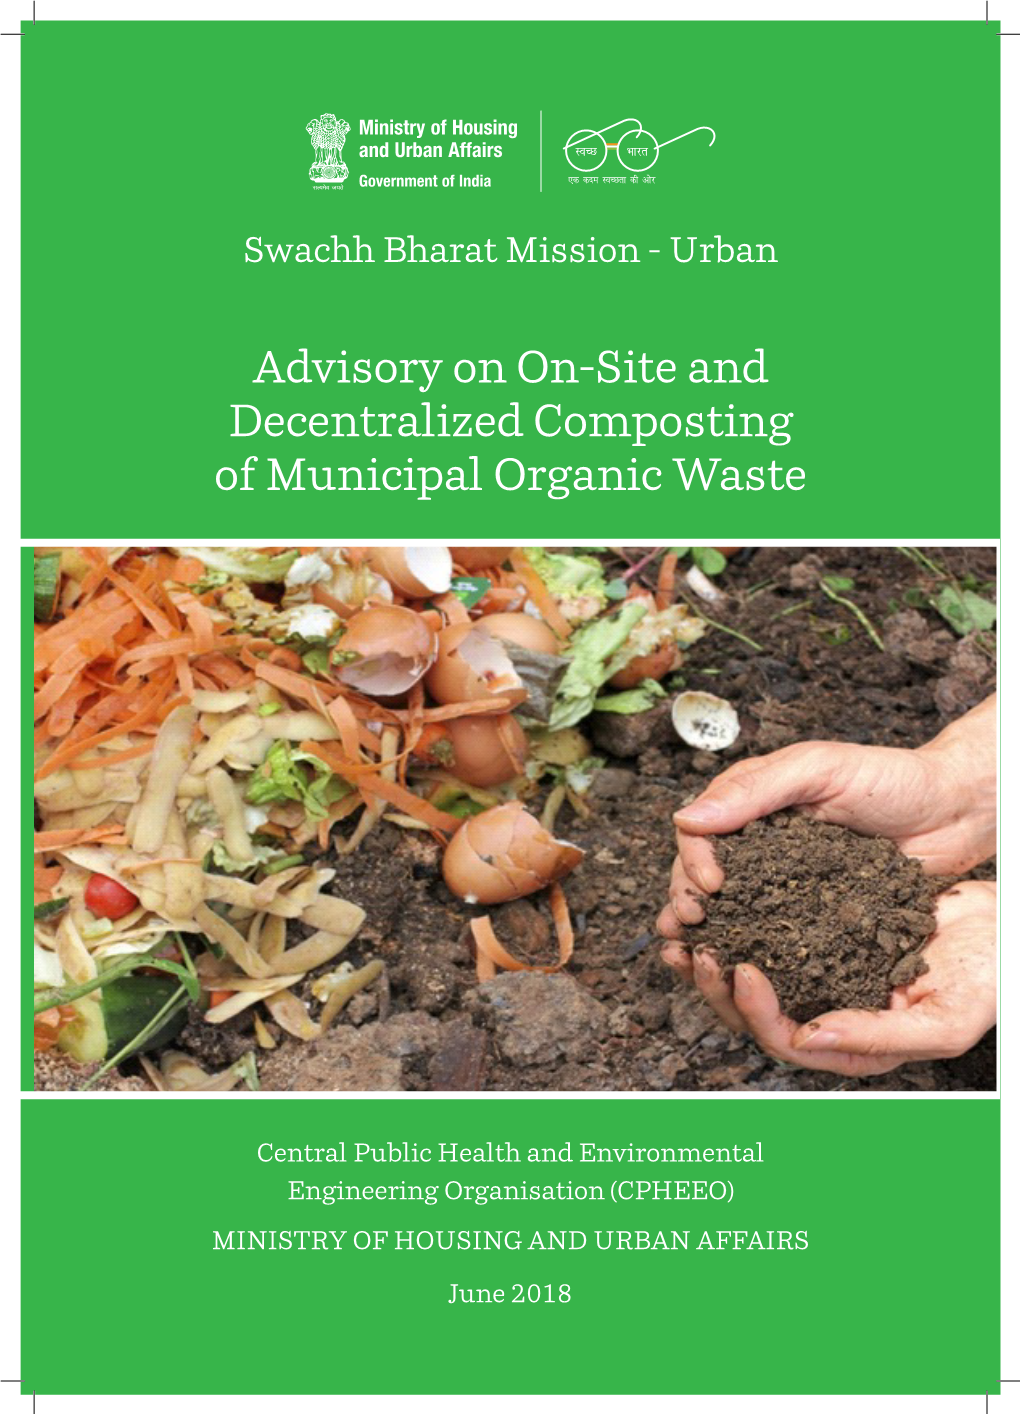 Advisory on Decentralized Processing of Organic Waste